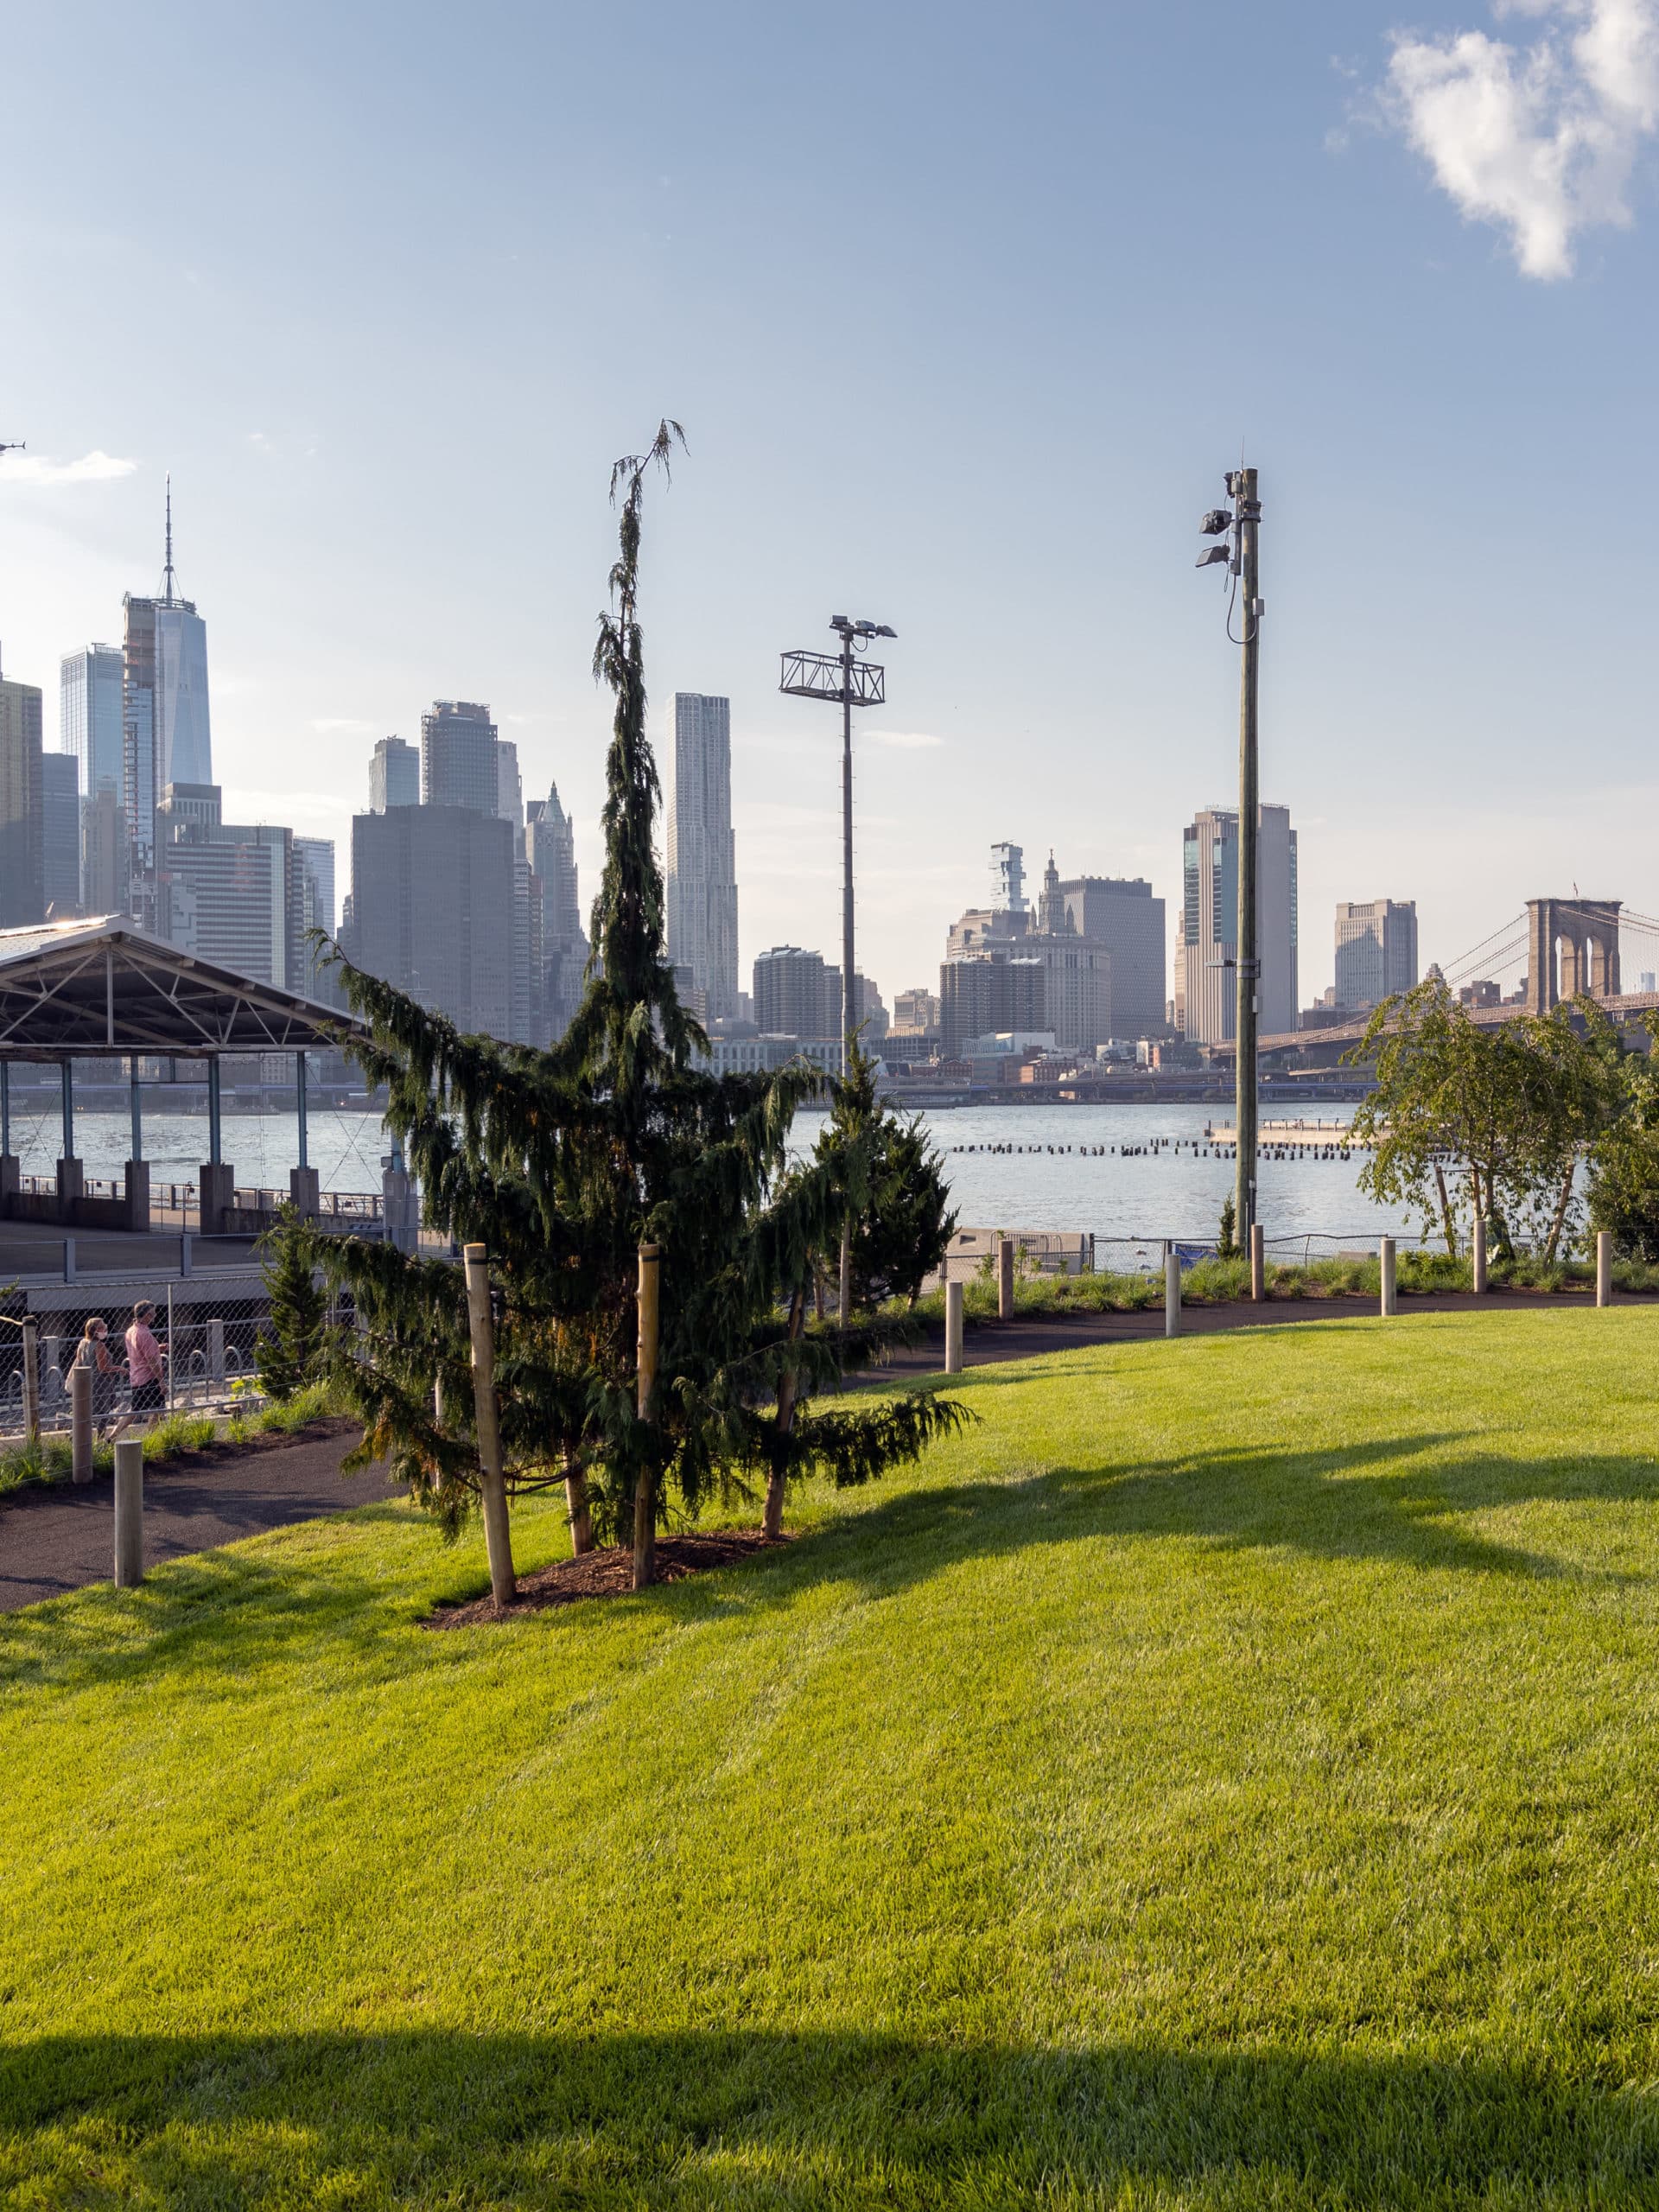 Pier 2 Uplands Lawn with view of water and lower Manhattan.